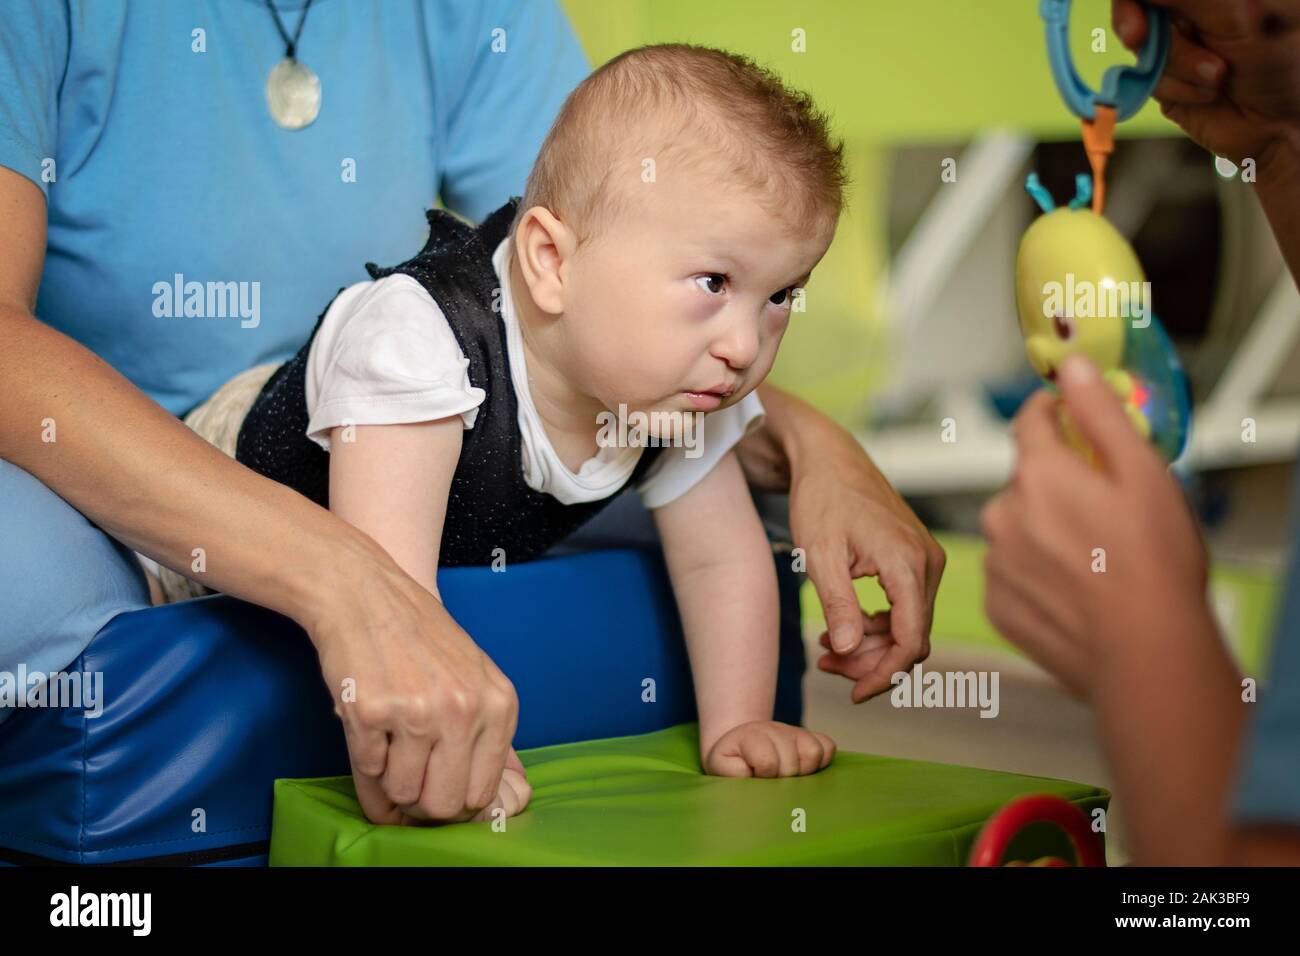 Portrait of a baby with cerebral palsy on physiotherapy in children therapy center. Boy with disability has therapy by doing exercises. Special needs. Stock Photo